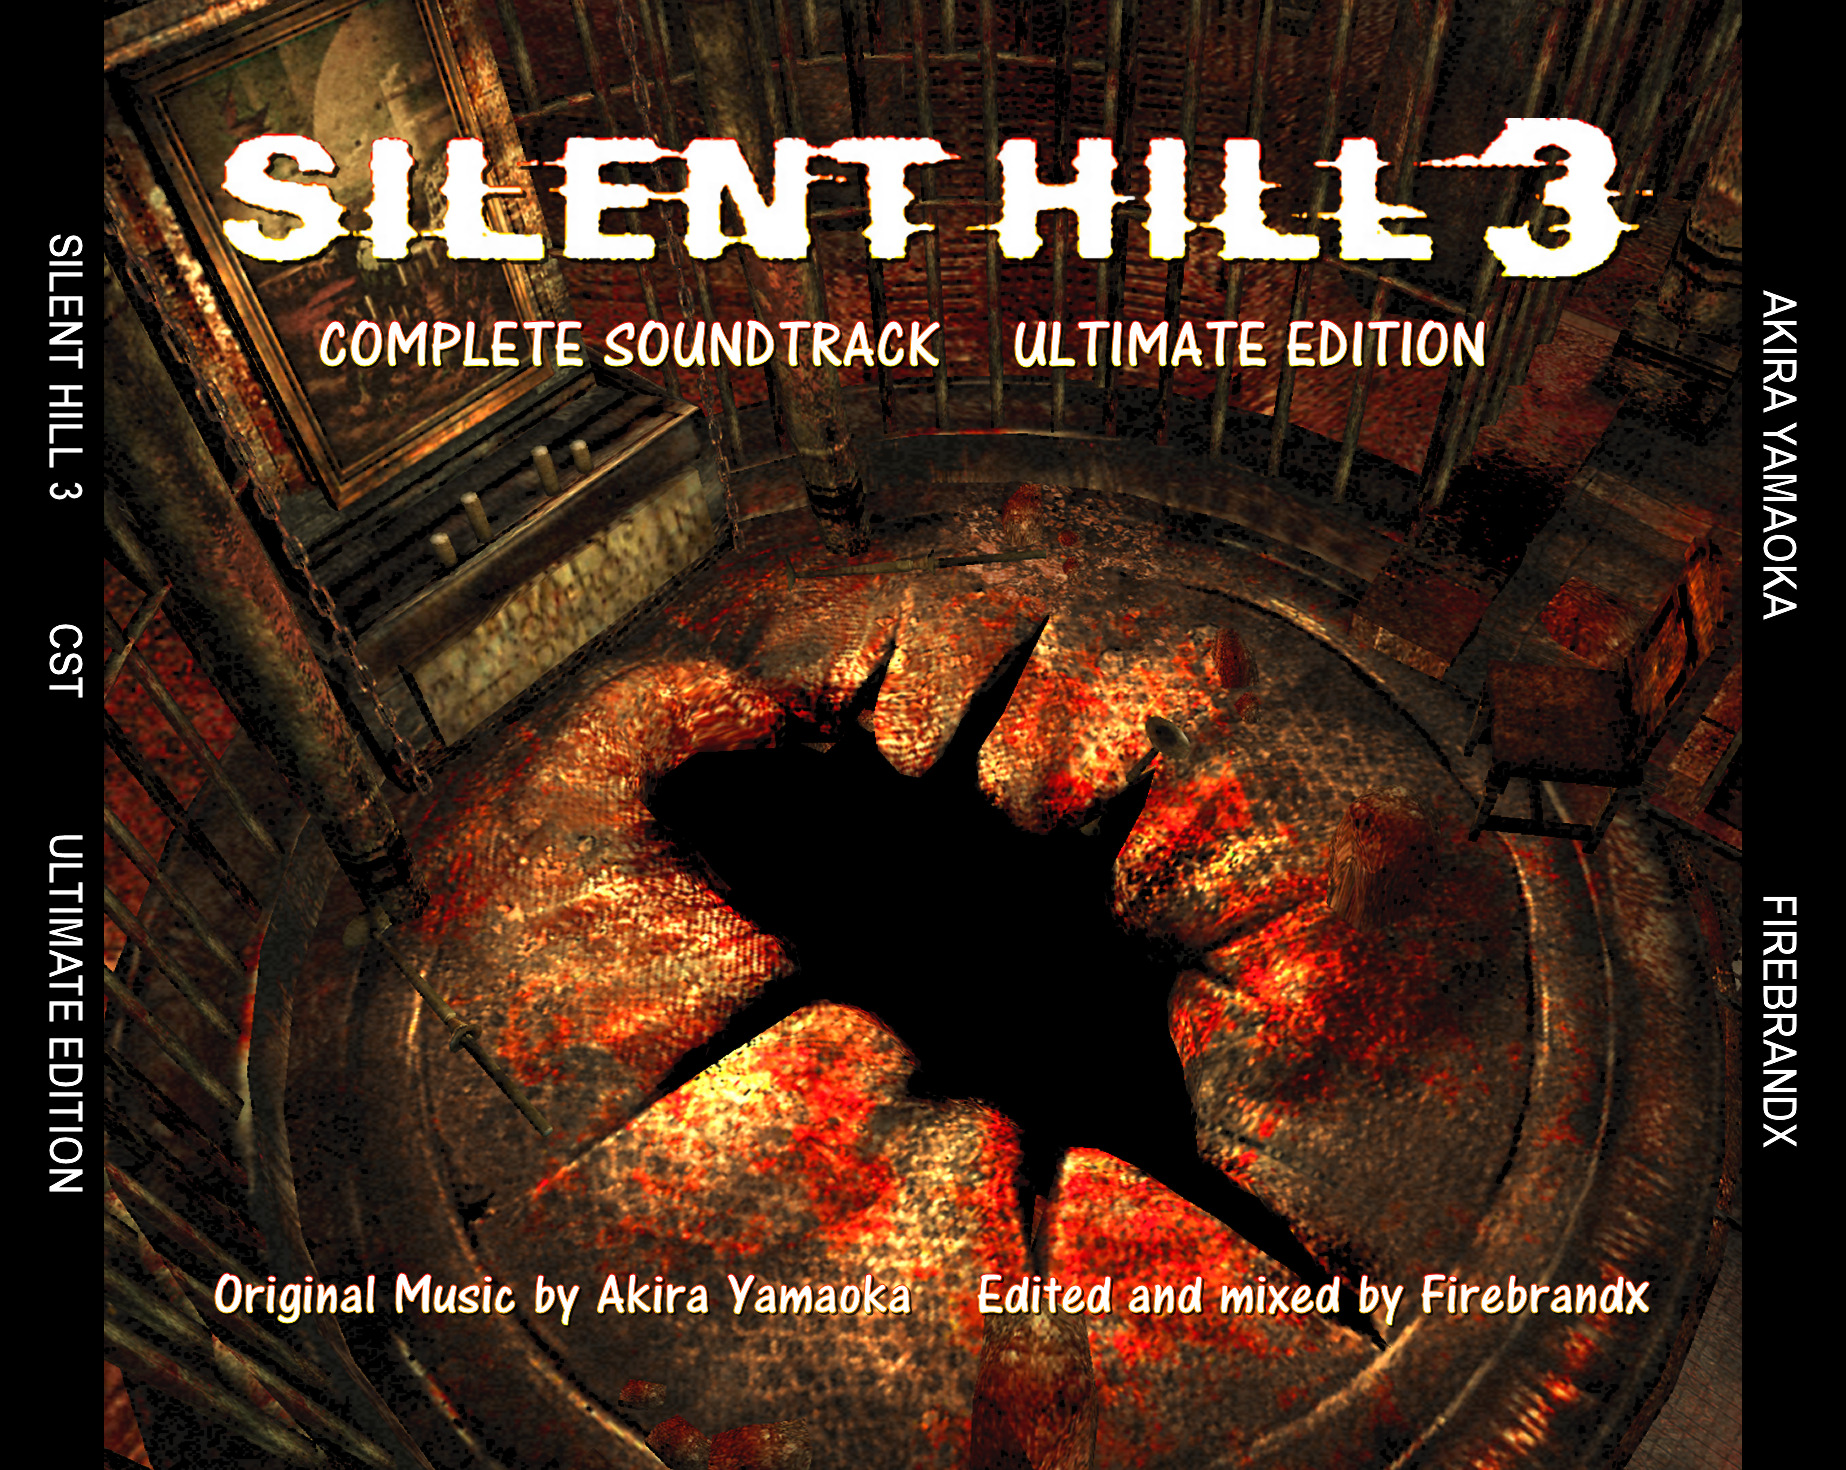 Silent Hill 3 Complete Soundtrack Ultimate Edition (PS2, Windows 